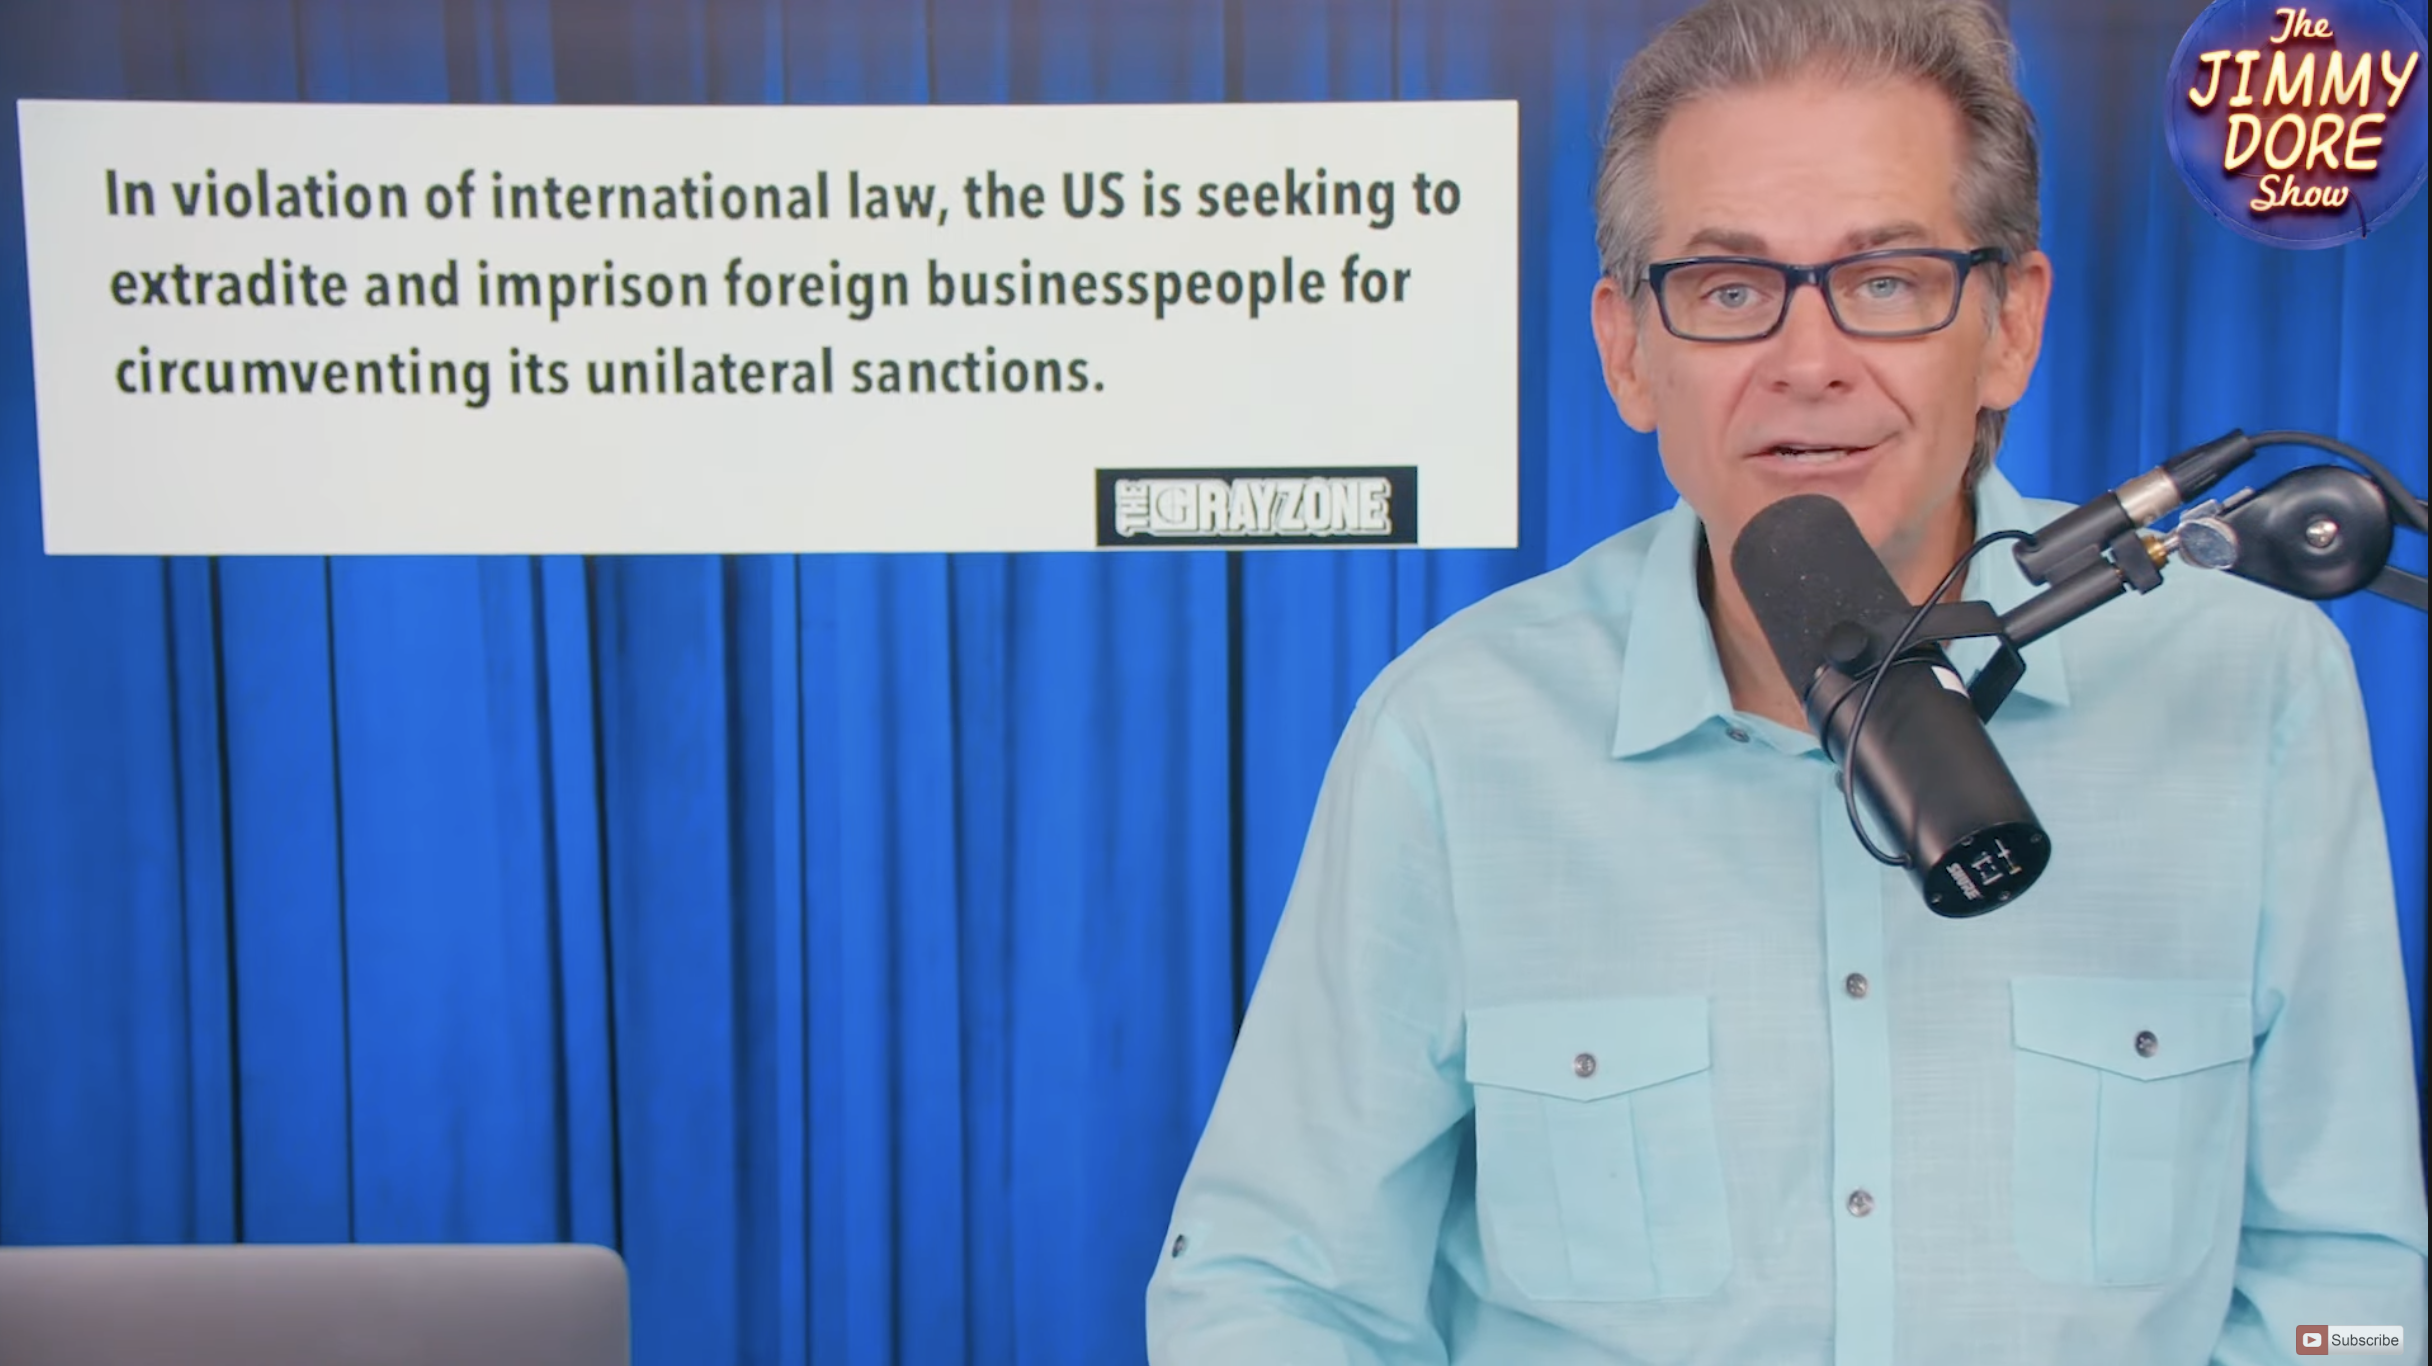 MUST VIDEOS: Jimmy Dore on Unlawful Kidnapping of Political Enemies Abroad